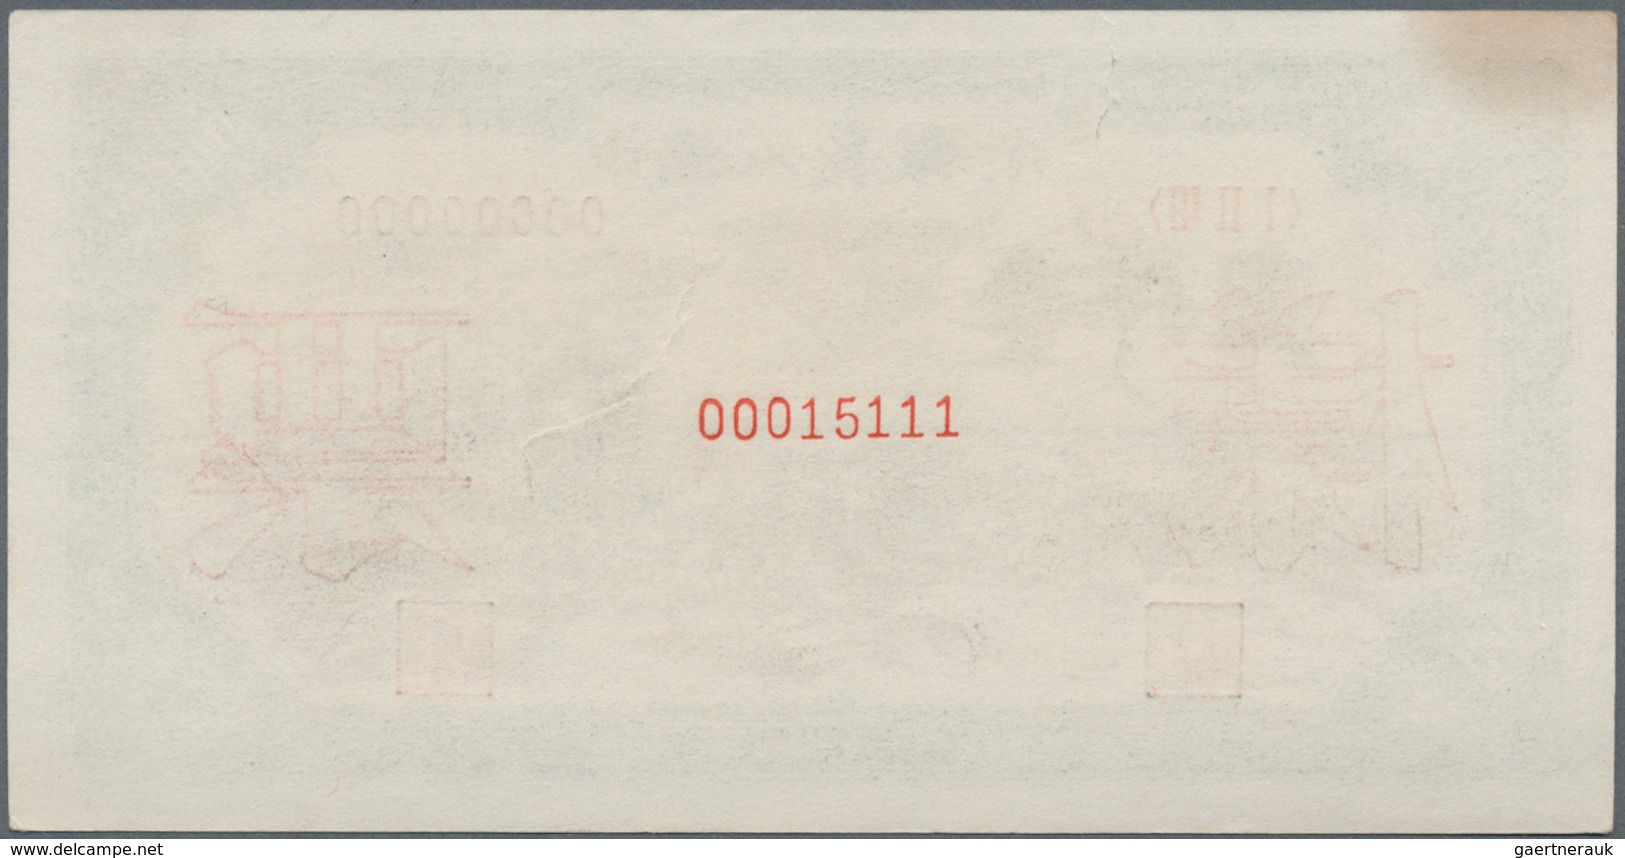 China: Peoples Bank Of China 1000 Yuan 1949 Front And Reverse SPECIMEN, P.849s With Specimen Number - Chine